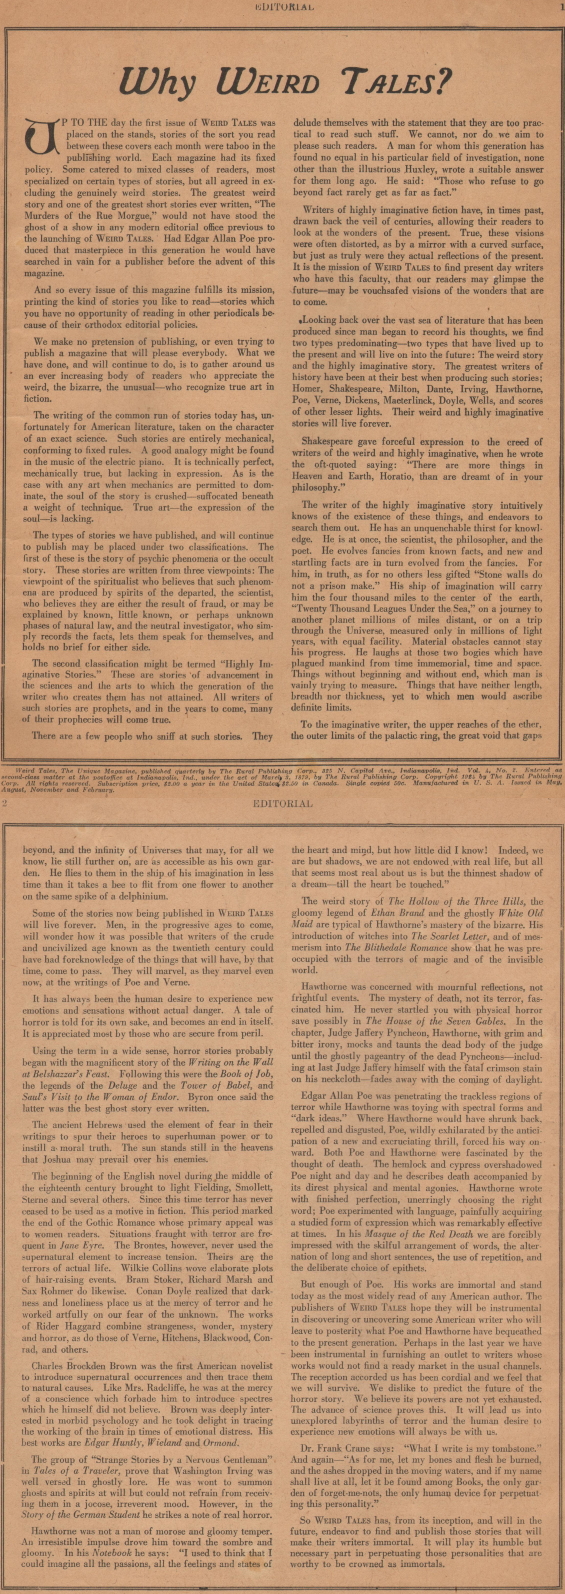 Why Weird Tales? by Otis Adelbert Kline - from WEIRD TALES, May June July 1924